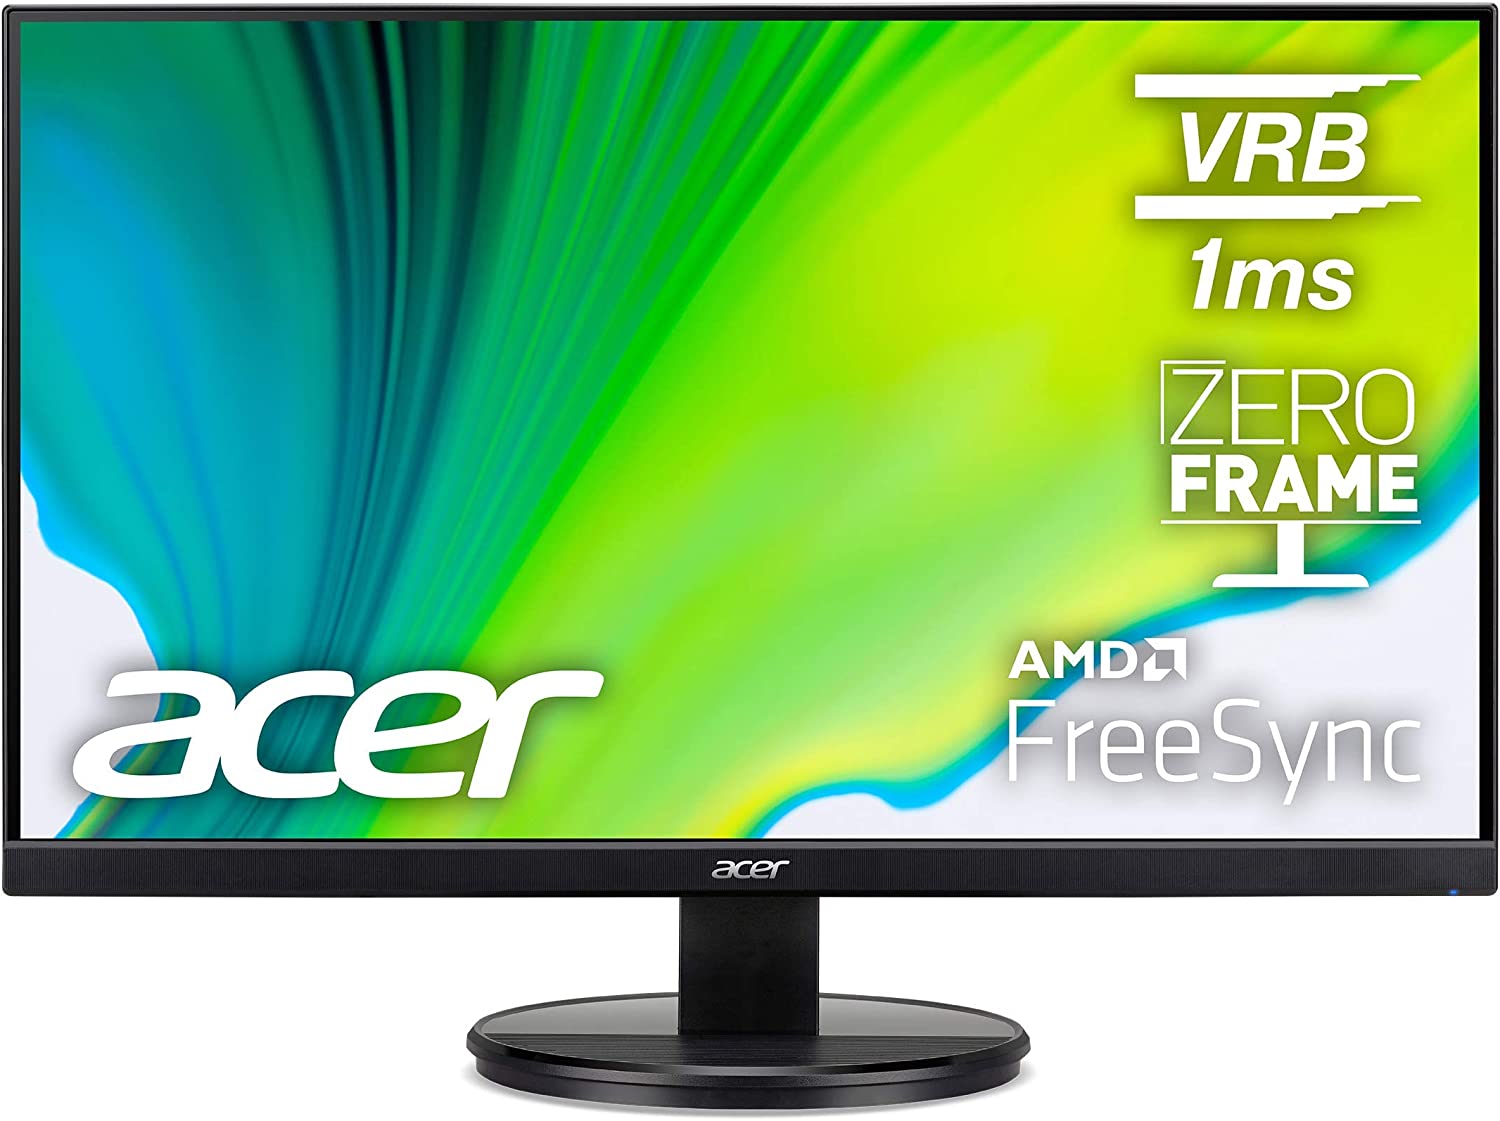 Acer 23.8” Full HD (1920 x 1080) Computer Monitor with AMD Radeon FreeSync Technology, 75Hz - $95 at Amazon